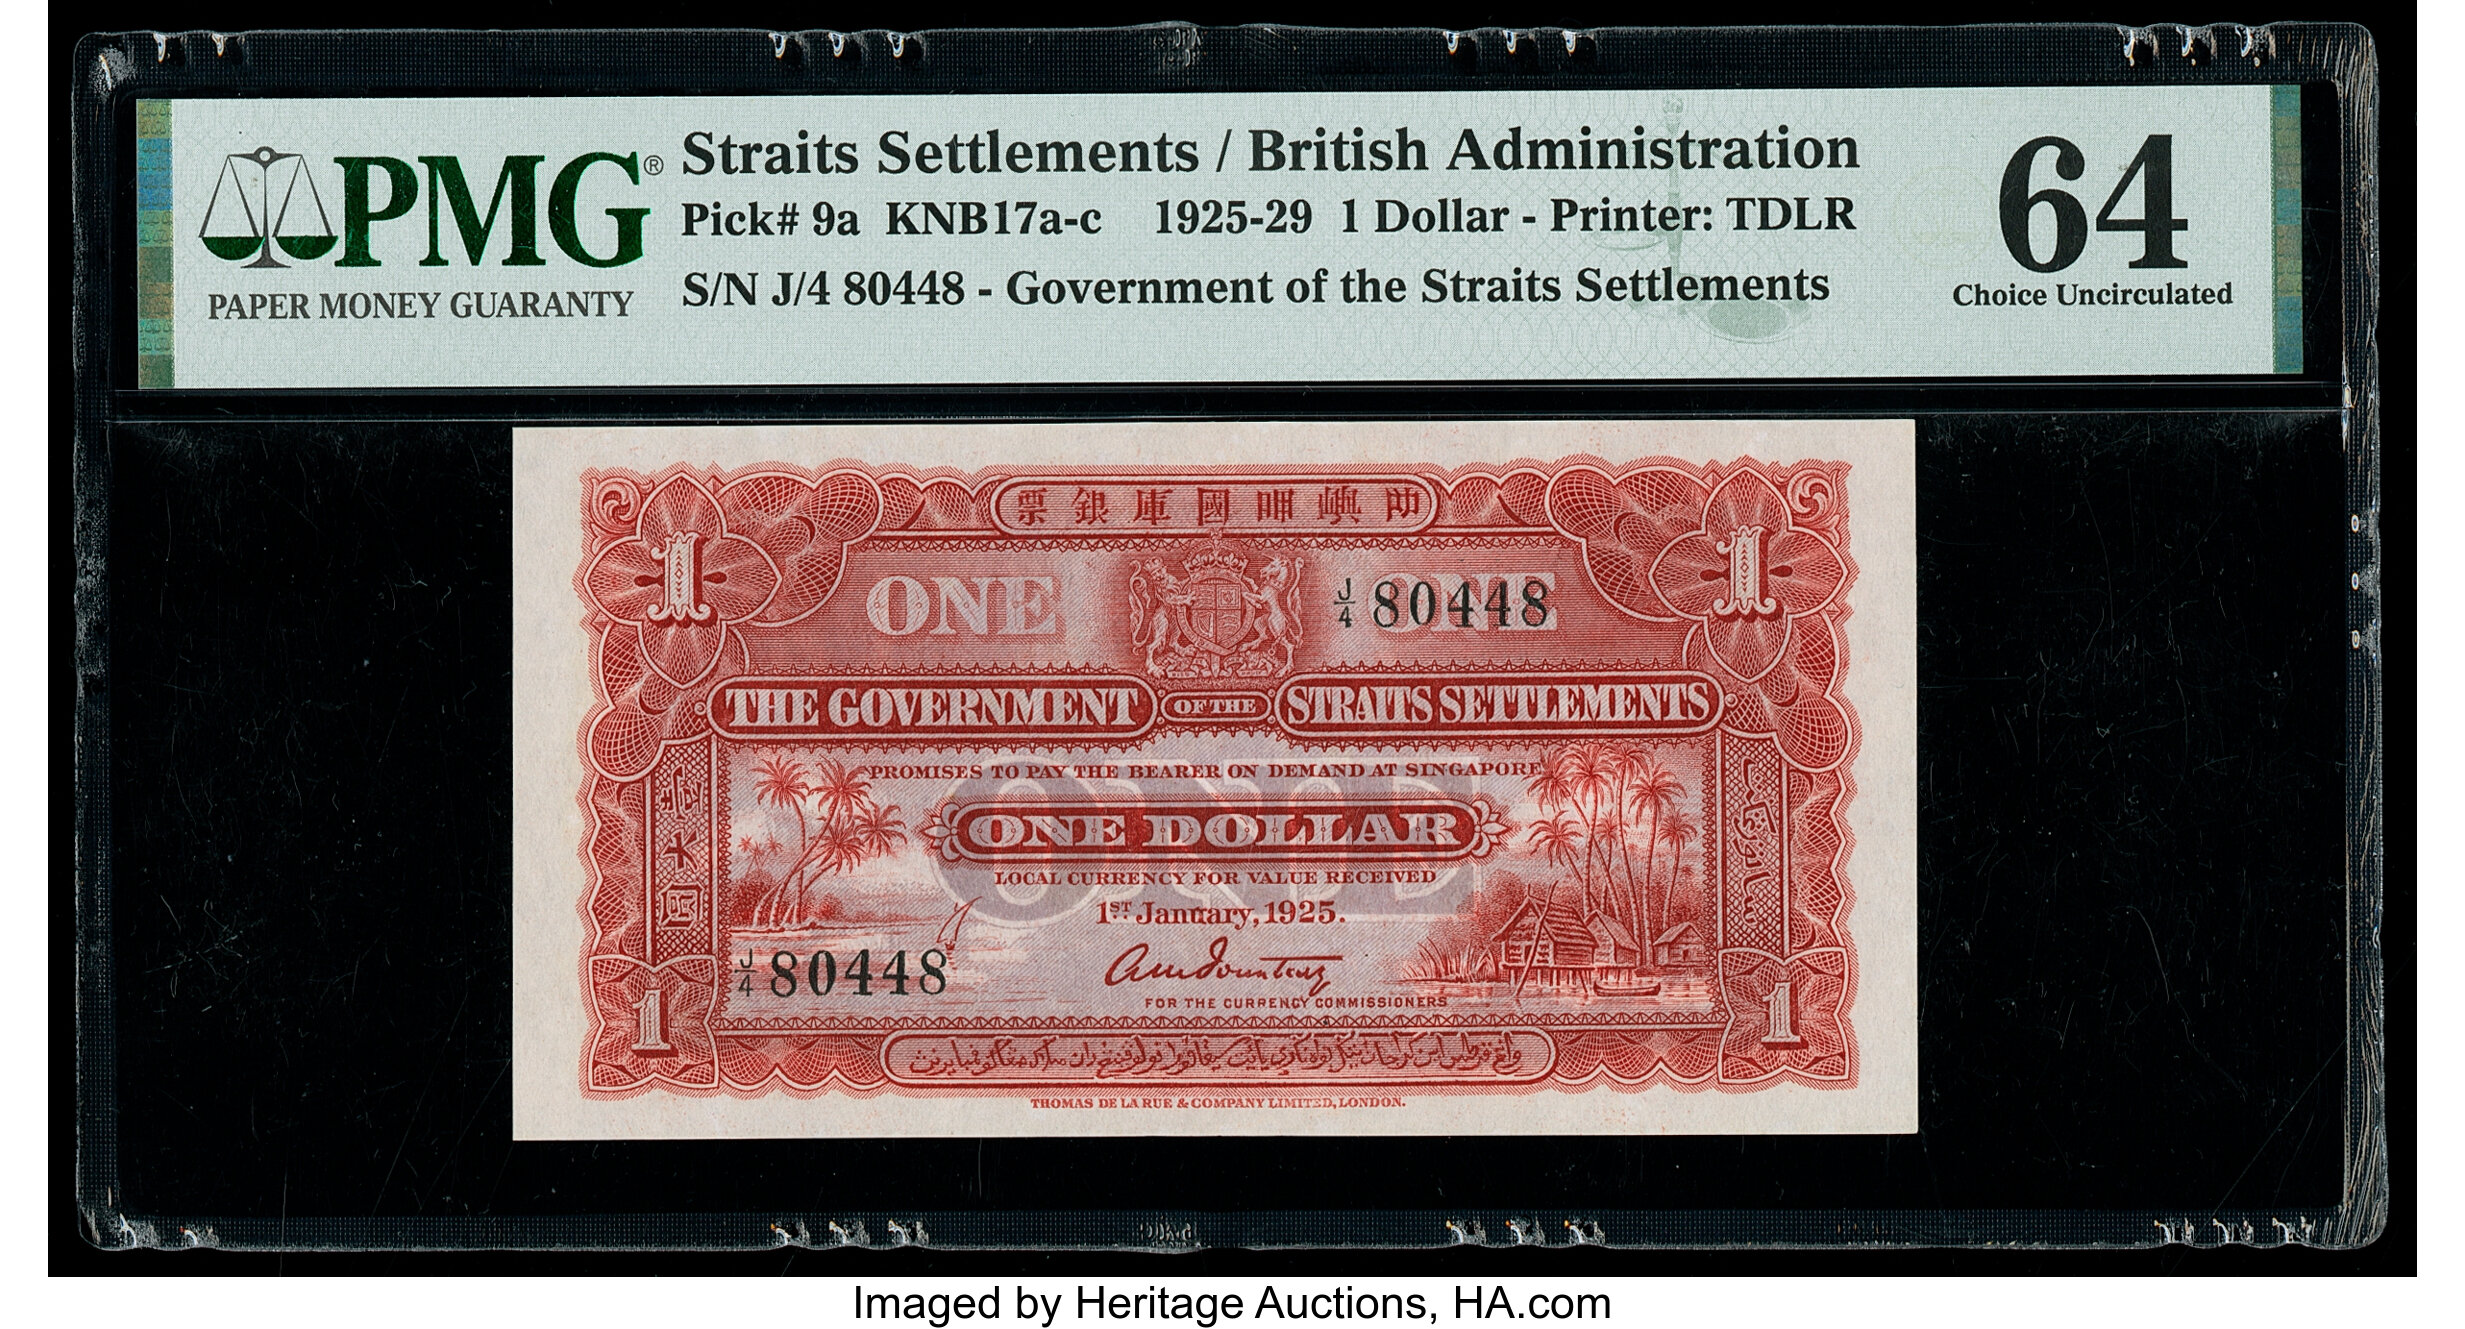 Straits Settlements Bank Note, Government of the Straits 